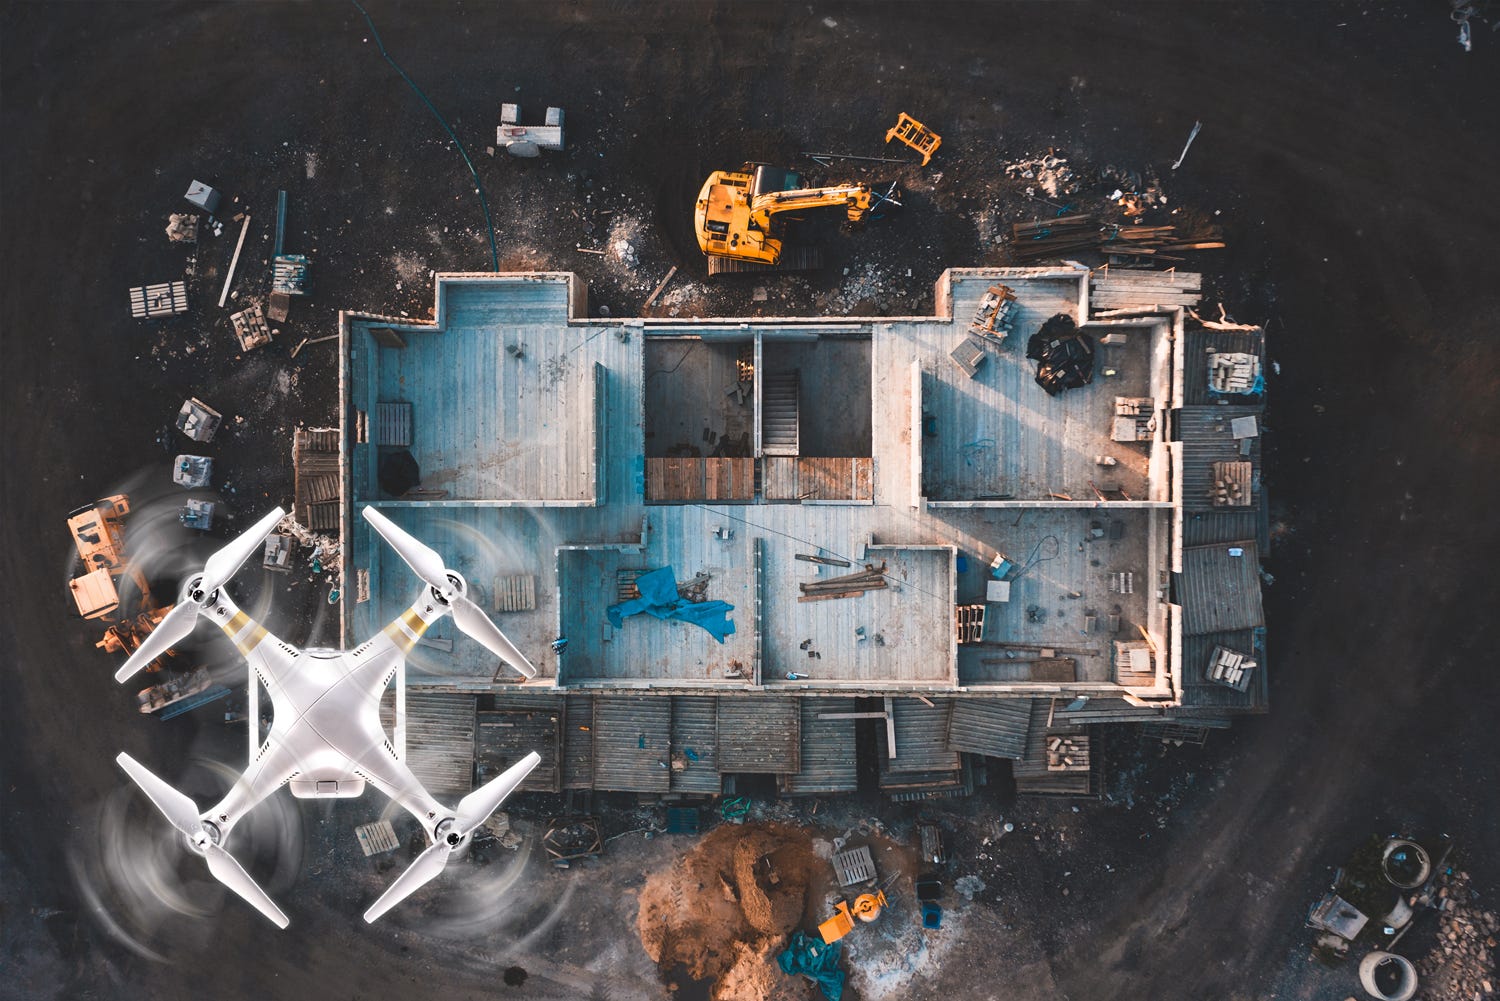 How Drones, VR and BIM are Improving Construction Jobsite Safety